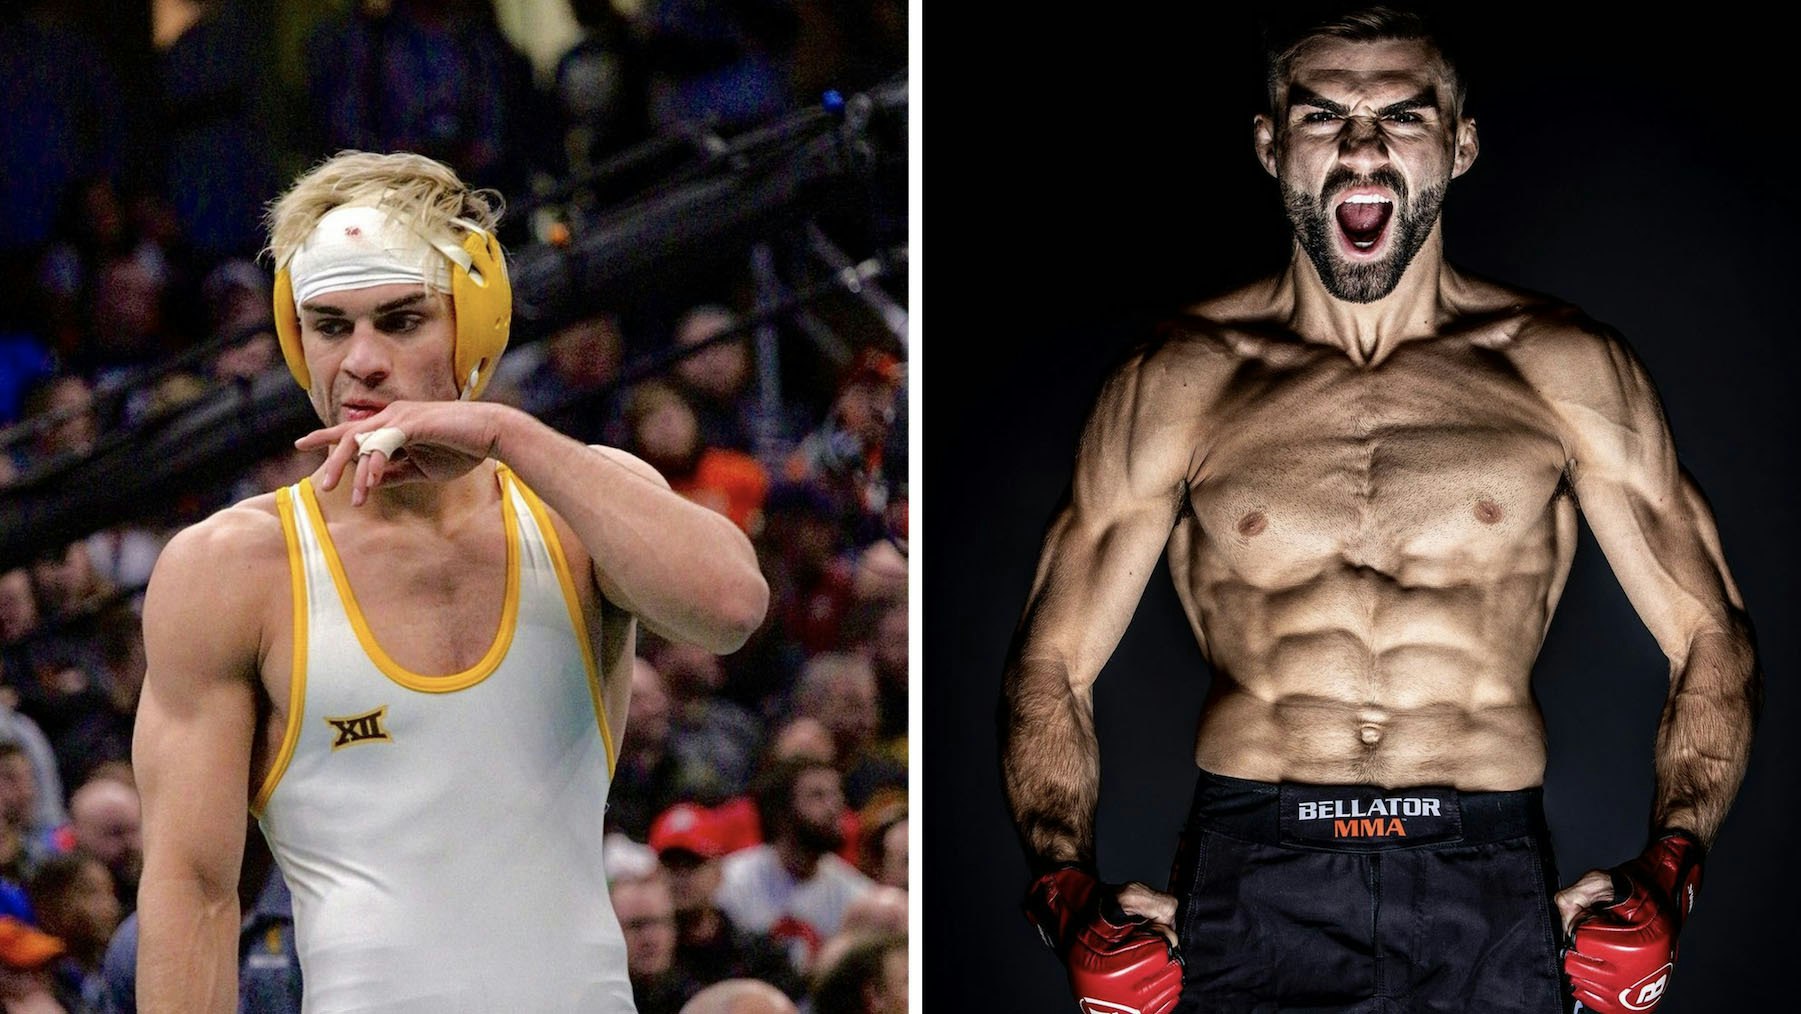 Bryce Meredith is the transformation of an All-American collegiate wrestler at the University of Wyoming into an undefeated MMA fighter.